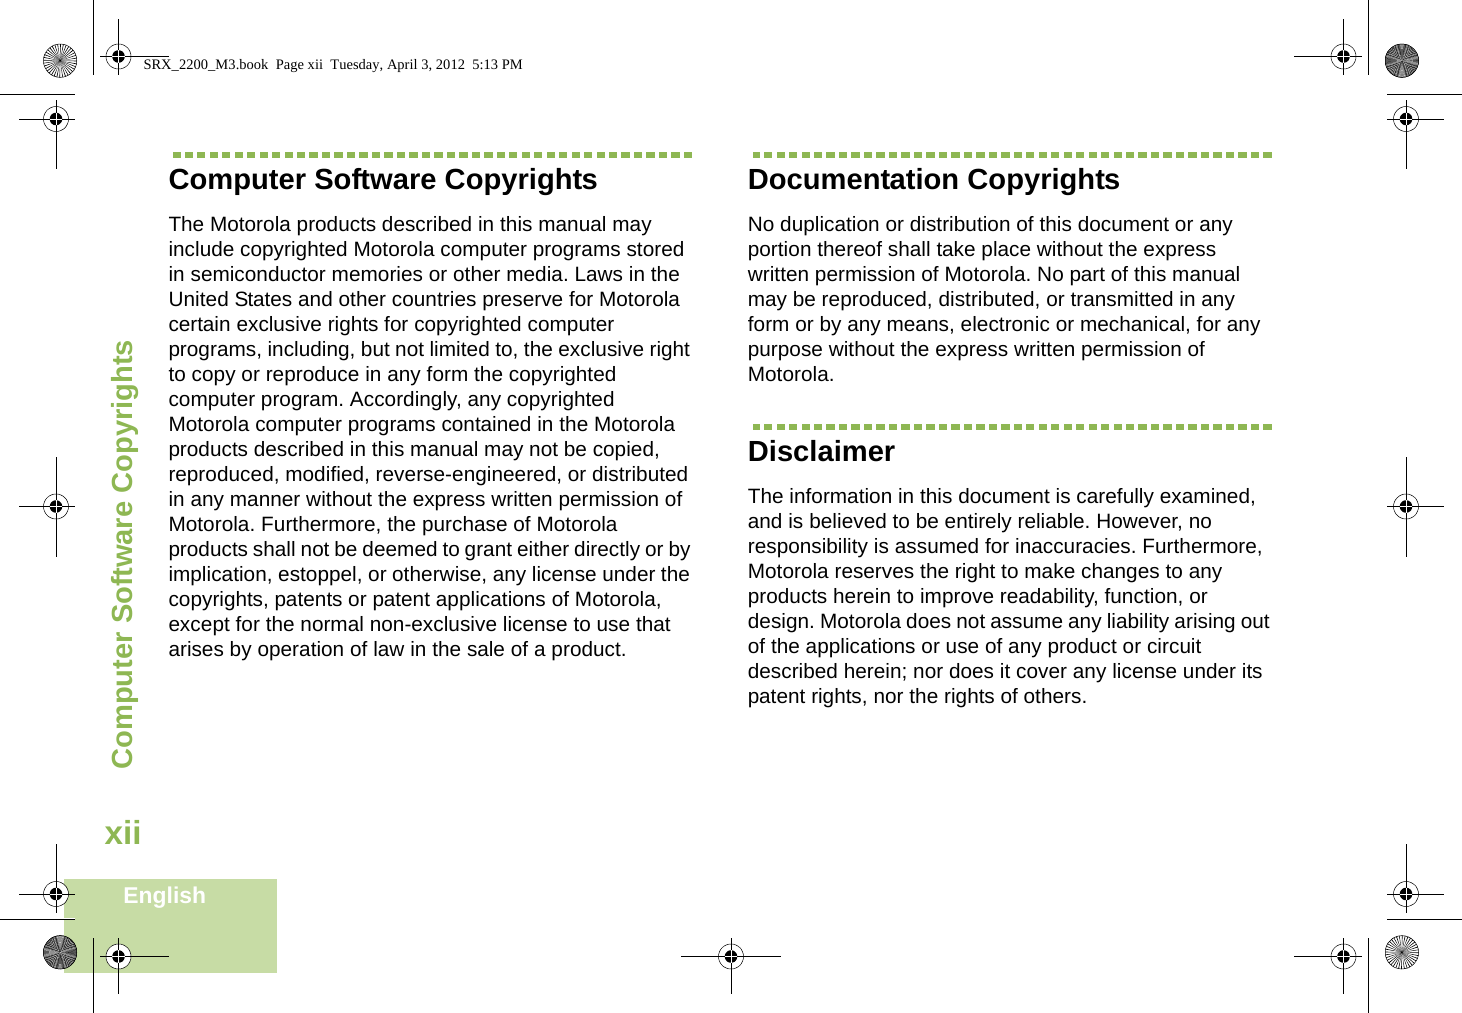 Computer Software CopyrightsEnglishxiiComputer Software CopyrightsThe Motorola products described in this manual may include copyrighted Motorola computer programs stored in semiconductor memories or other media. Laws in the United States and other countries preserve for Motorola certain exclusive rights for copyrighted computer programs, including, but not limited to, the exclusive right to copy or reproduce in any form the copyrighted computer program. Accordingly, any copyrighted Motorola computer programs contained in the Motorola products described in this manual may not be copied, reproduced, modified, reverse-engineered, or distributed in any manner without the express written permission of Motorola. Furthermore, the purchase of Motorola products shall not be deemed to grant either directly or by implication, estoppel, or otherwise, any license under the copyrights, patents or patent applications of Motorola, except for the normal non-exclusive license to use that arises by operation of law in the sale of a product.Documentation CopyrightsNo duplication or distribution of this document or any portion thereof shall take place without the express written permission of Motorola. No part of this manual may be reproduced, distributed, or transmitted in any form or by any means, electronic or mechanical, for any purpose without the express written permission of Motorola.DisclaimerThe information in this document is carefully examined, and is believed to be entirely reliable. However, no responsibility is assumed for inaccuracies. Furthermore, Motorola reserves the right to make changes to any products herein to improve readability, function, or design. Motorola does not assume any liability arising out of the applications or use of any product or circuit described herein; nor does it cover any license under its patent rights, nor the rights of others. SRX_2200_M3.book  Page xii  Tuesday, April 3, 2012  5:13 PM